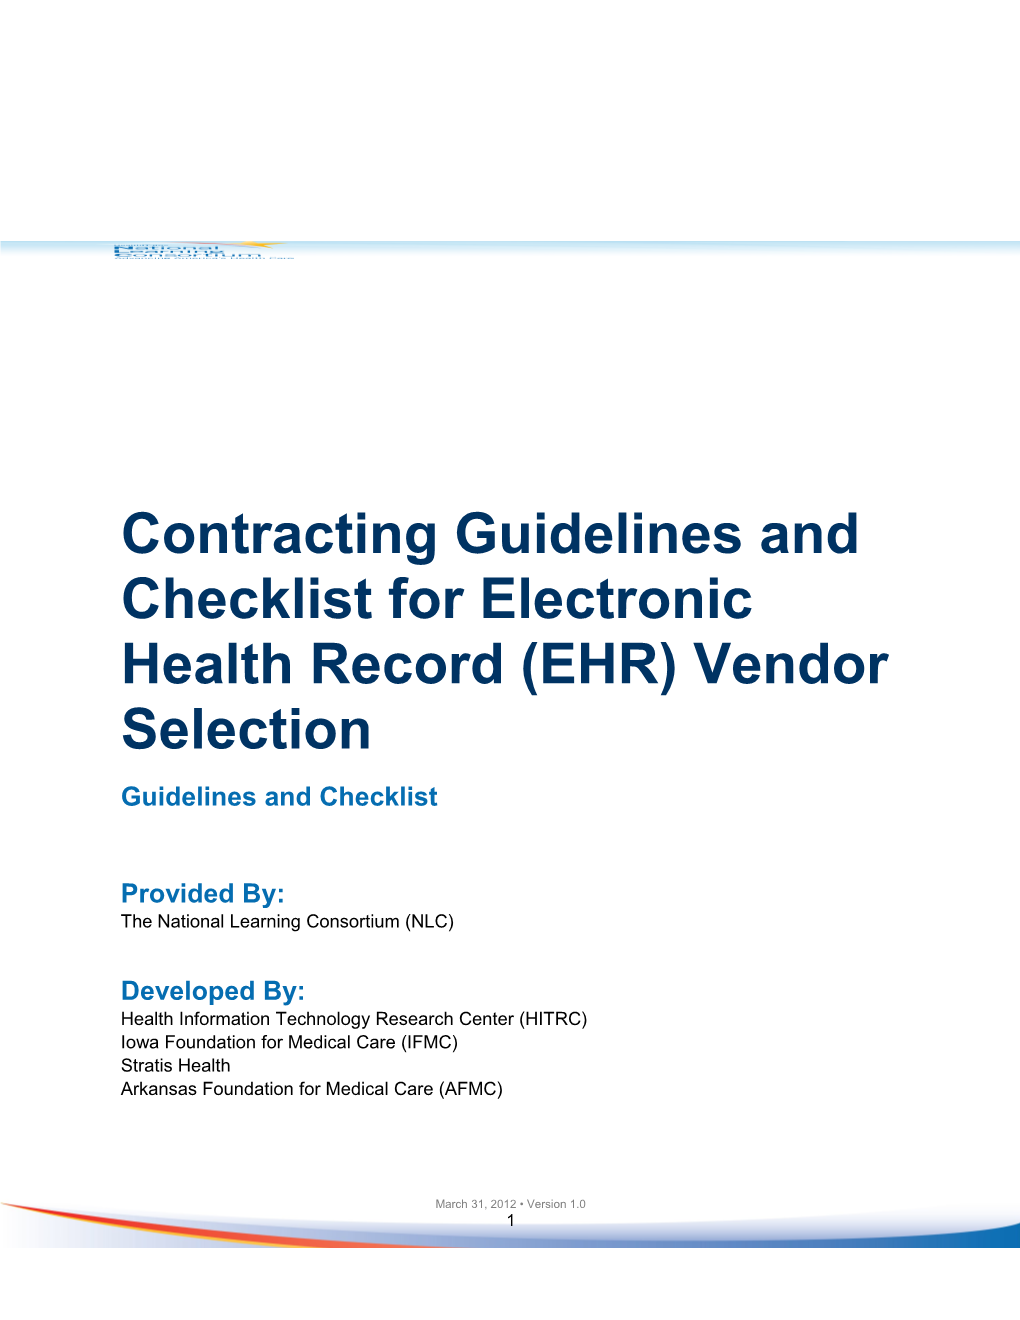 Contracting Guidelines and Checklist for Electronic Health Record (EHR) Vendor Selection